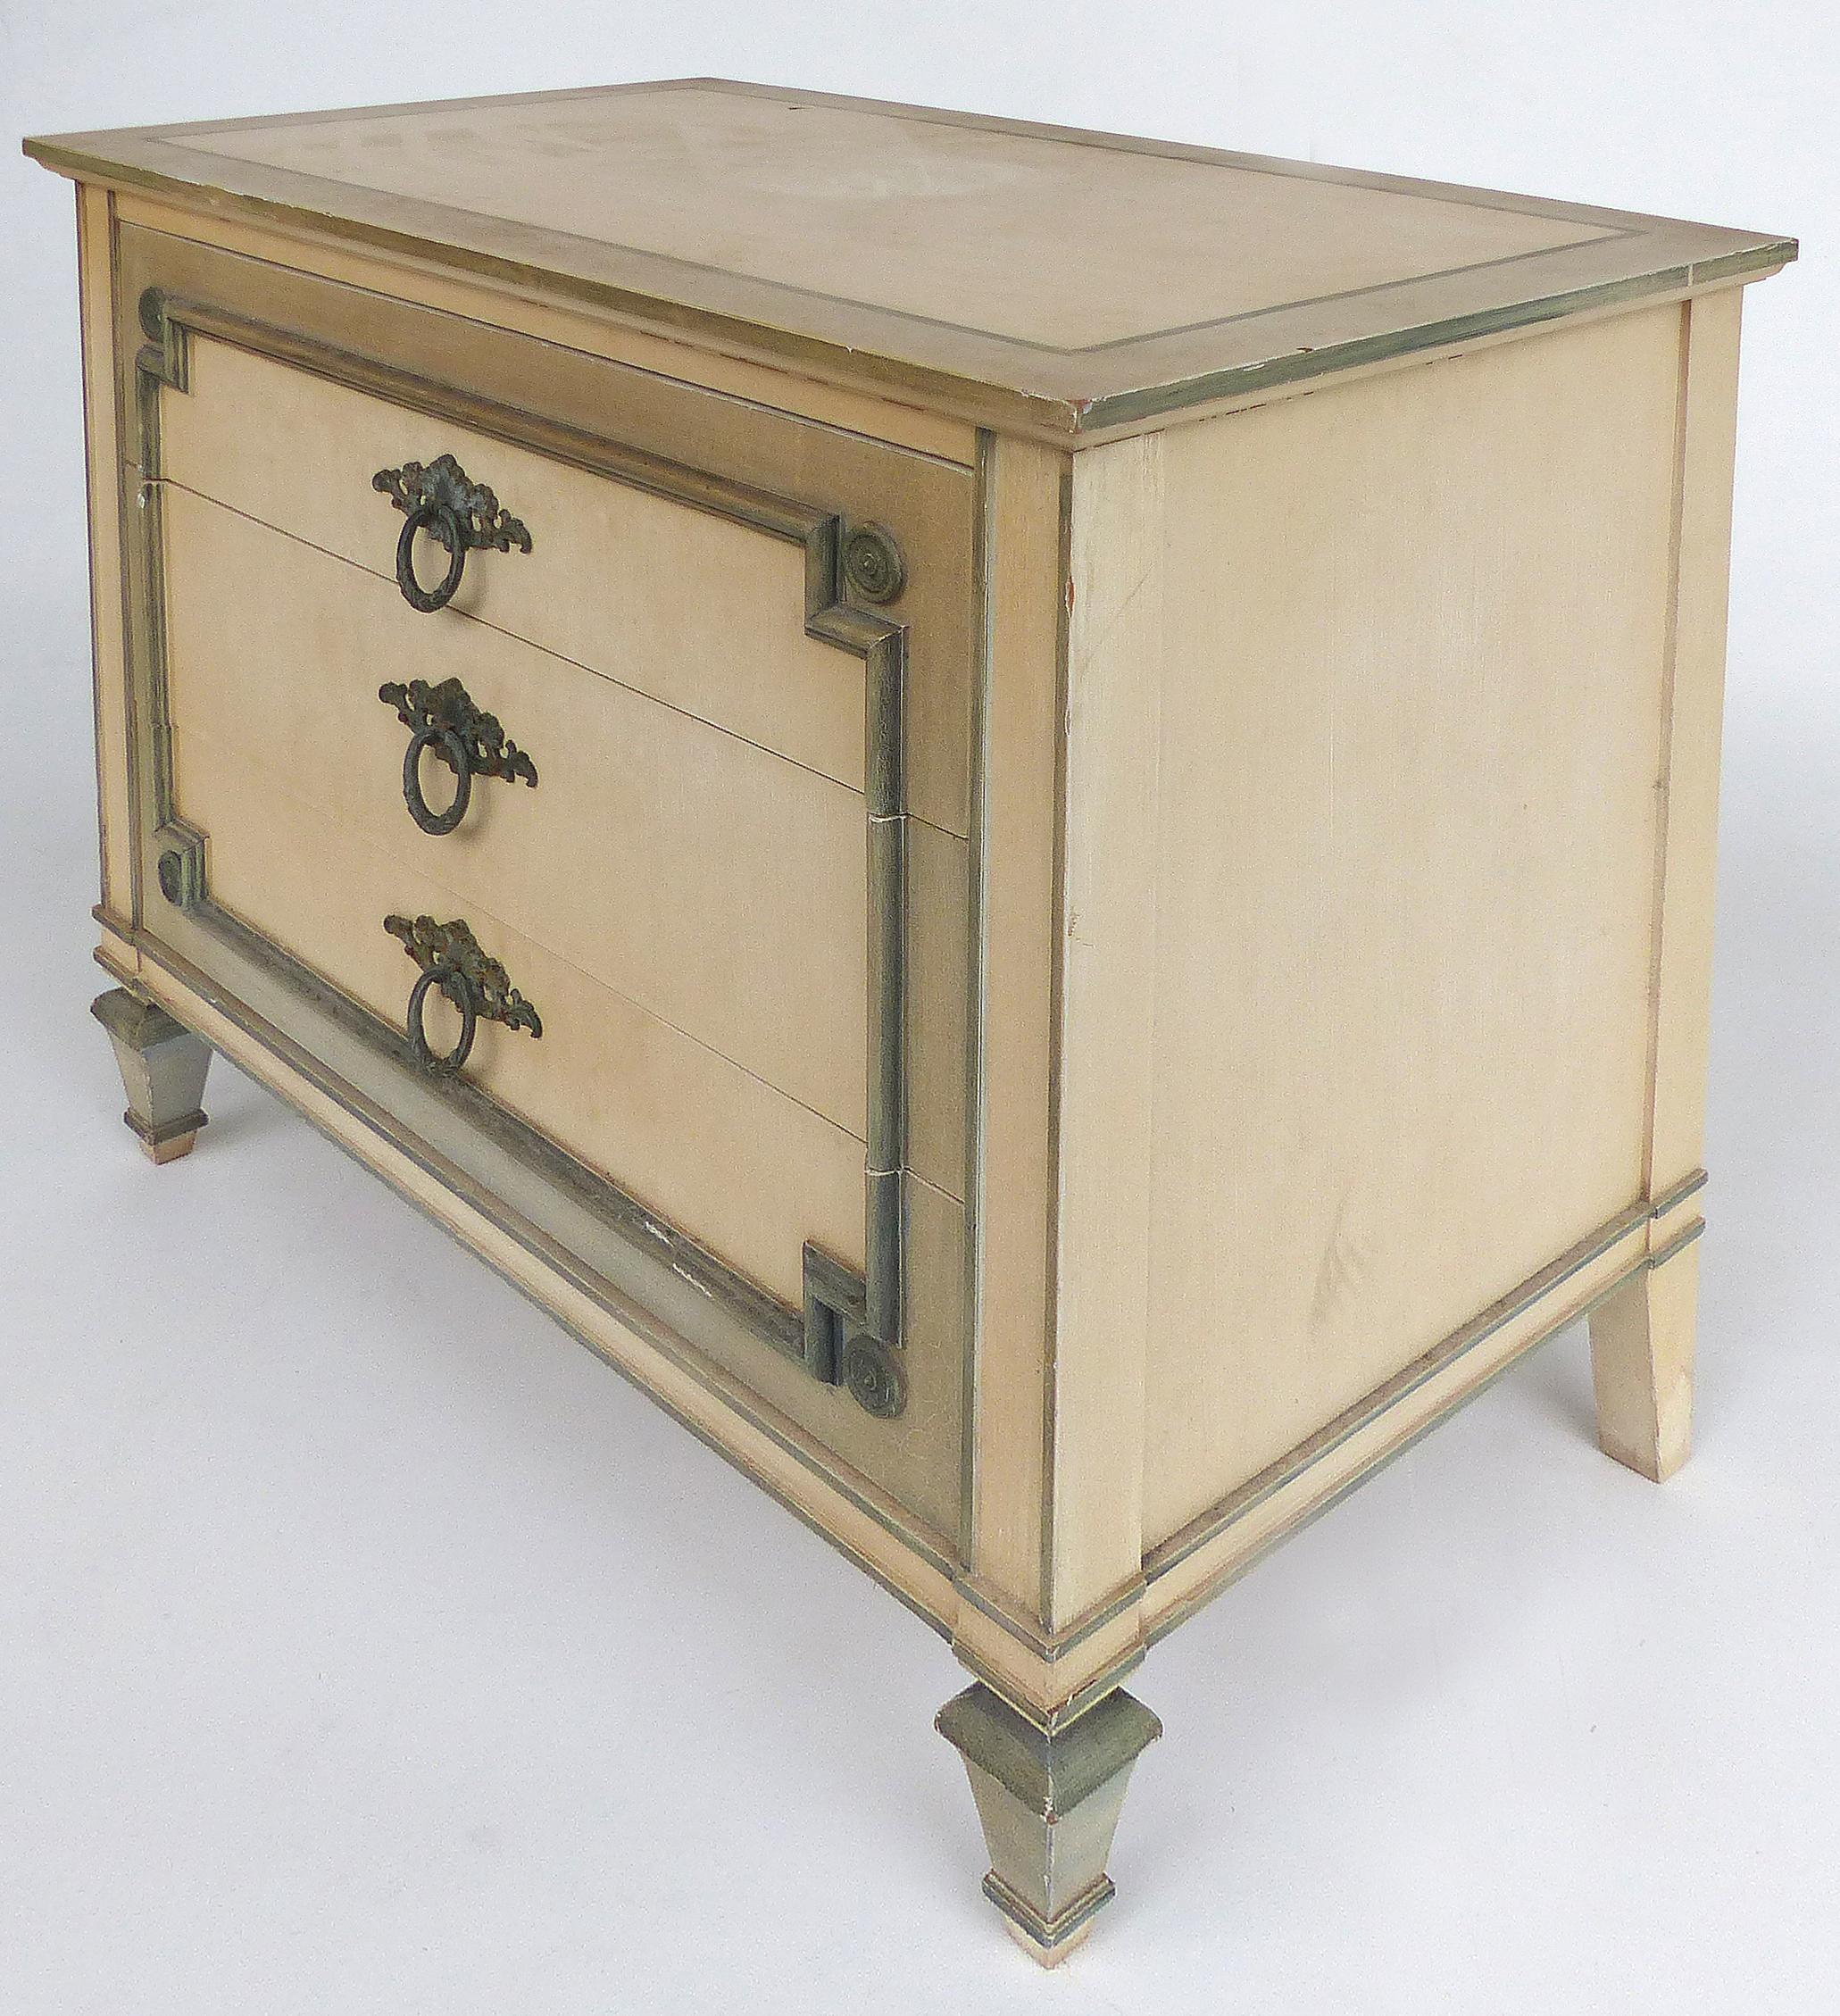 John Widdicomb Hand Painted Night Tables with Drawers, Pair

Offered for sale is a pair of night tables by John Widdicomb of Grand Rapids, MI labeled and dated 1971.